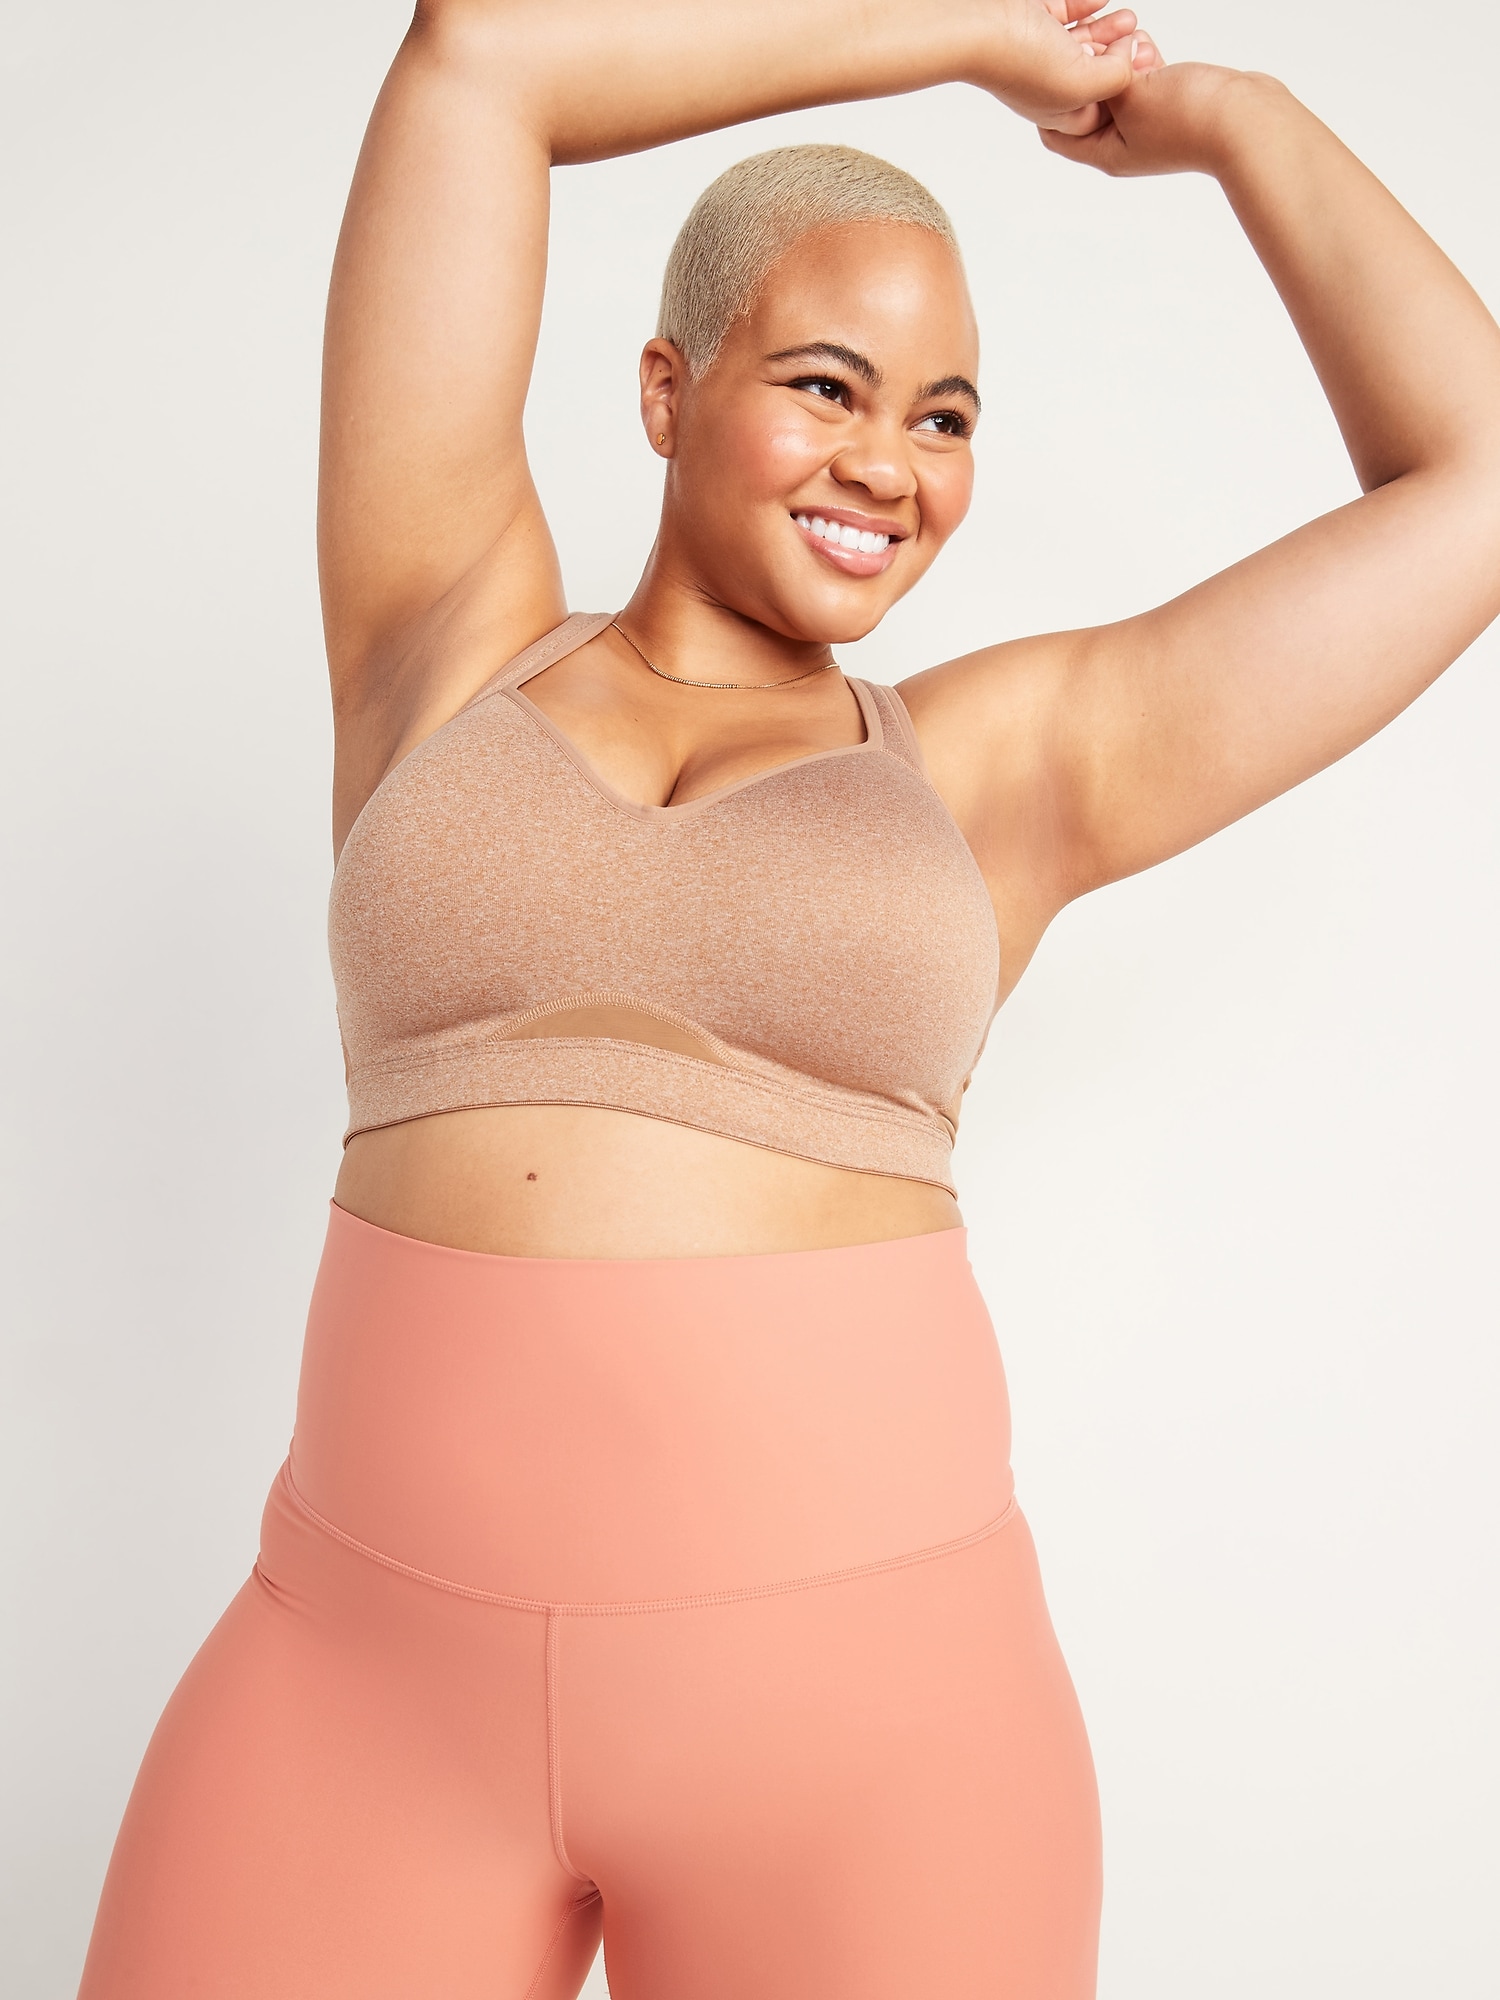 Old Navy Womens Sports Bras in Womens Activewear